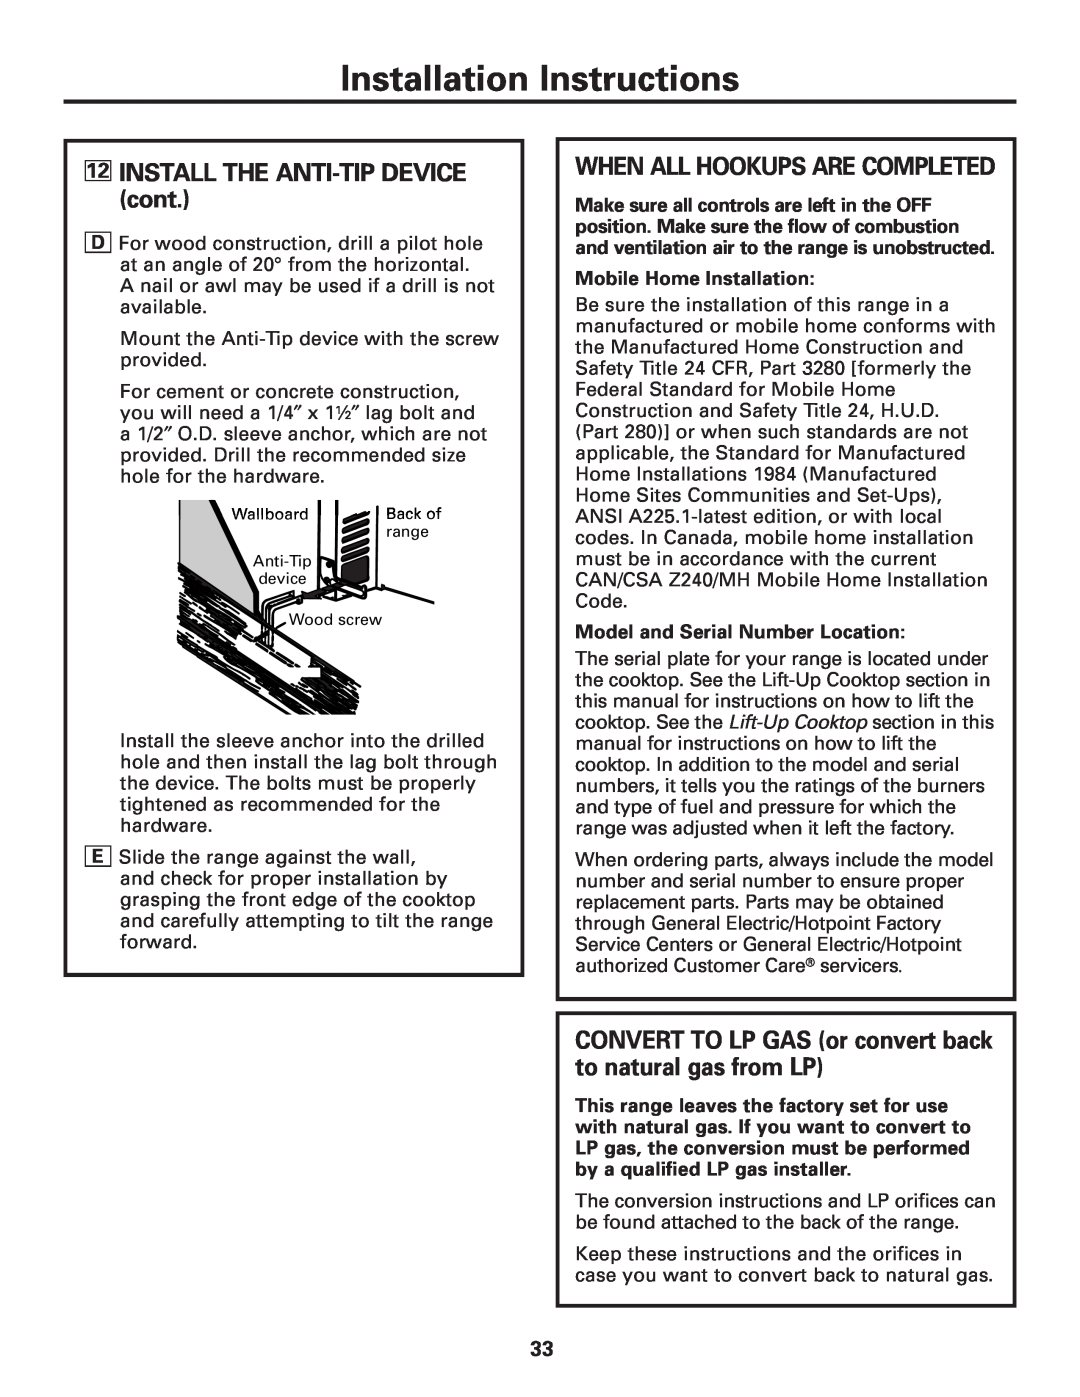 GE JGAS02 owner manual 12INSTALL THE ANTI-TIPDEVICE cont, When All Hookups Are Completed, Installation Instructions 